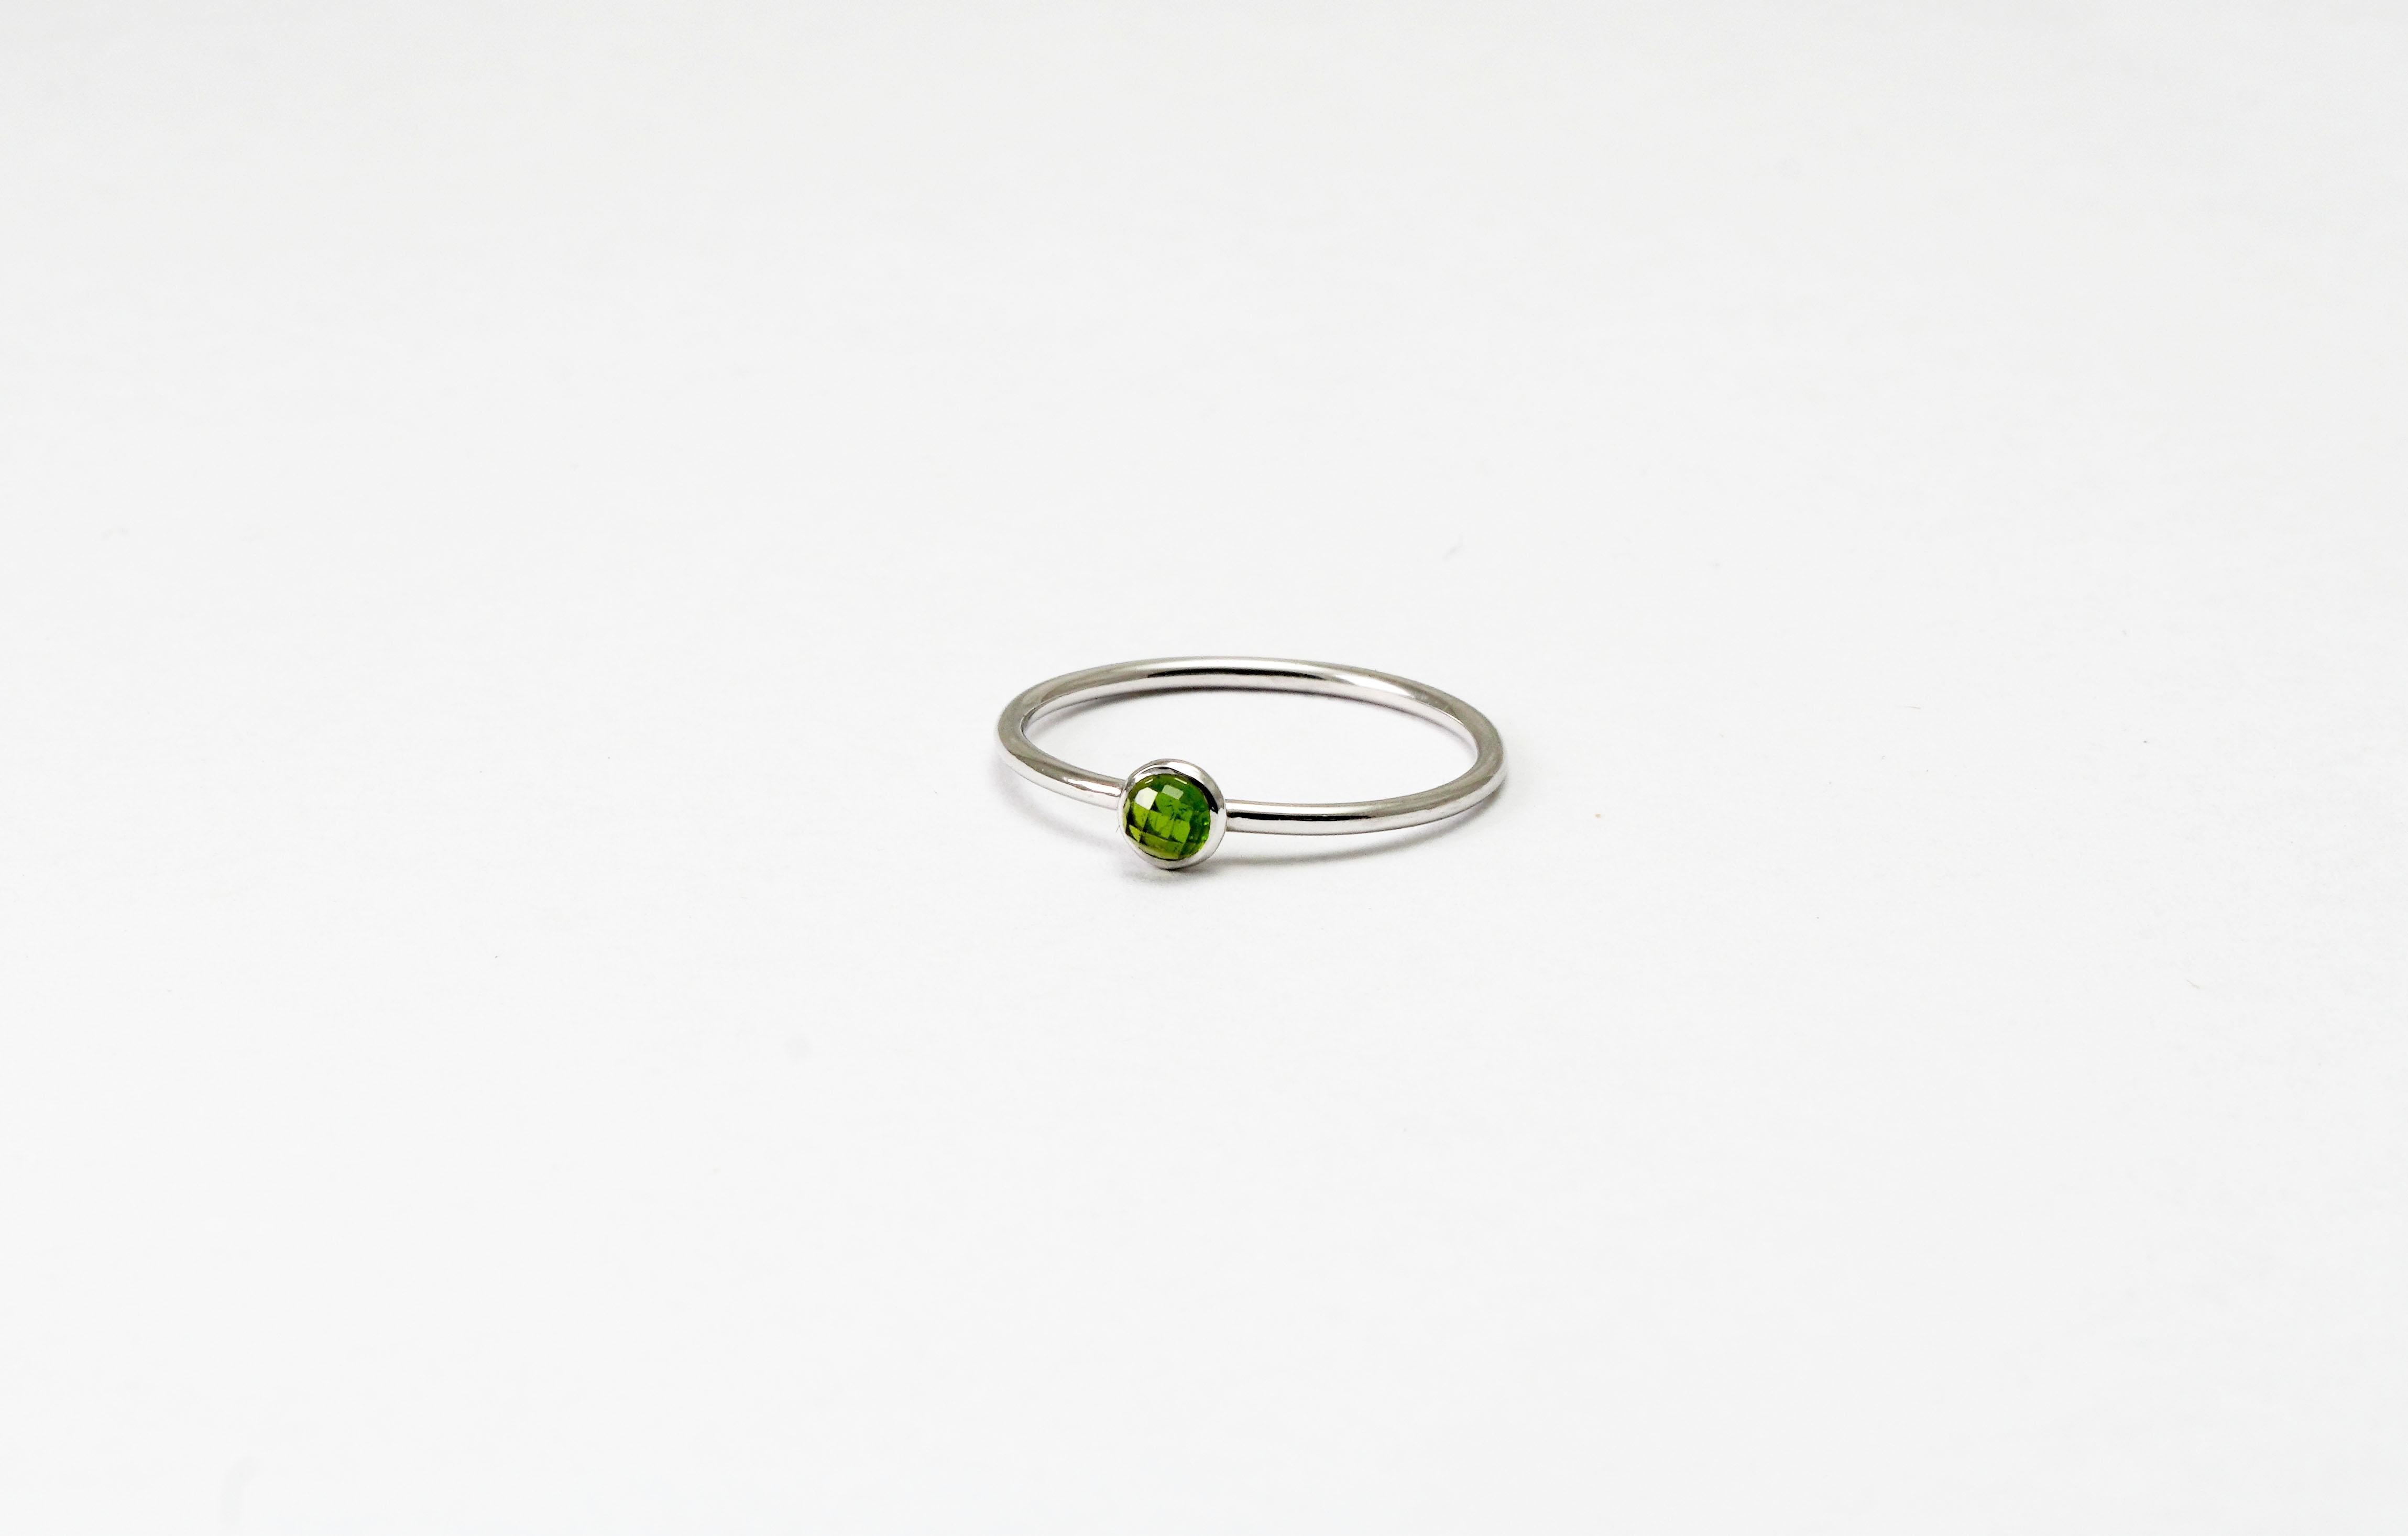 14 kt Gold ring with Chrome Diopside
Gold Color: White
Ring size:  5 1/2 US
Total weight: 0.86 grams

Set with:
- Chrome Diopside
Cut: Fancy
Colour: Green